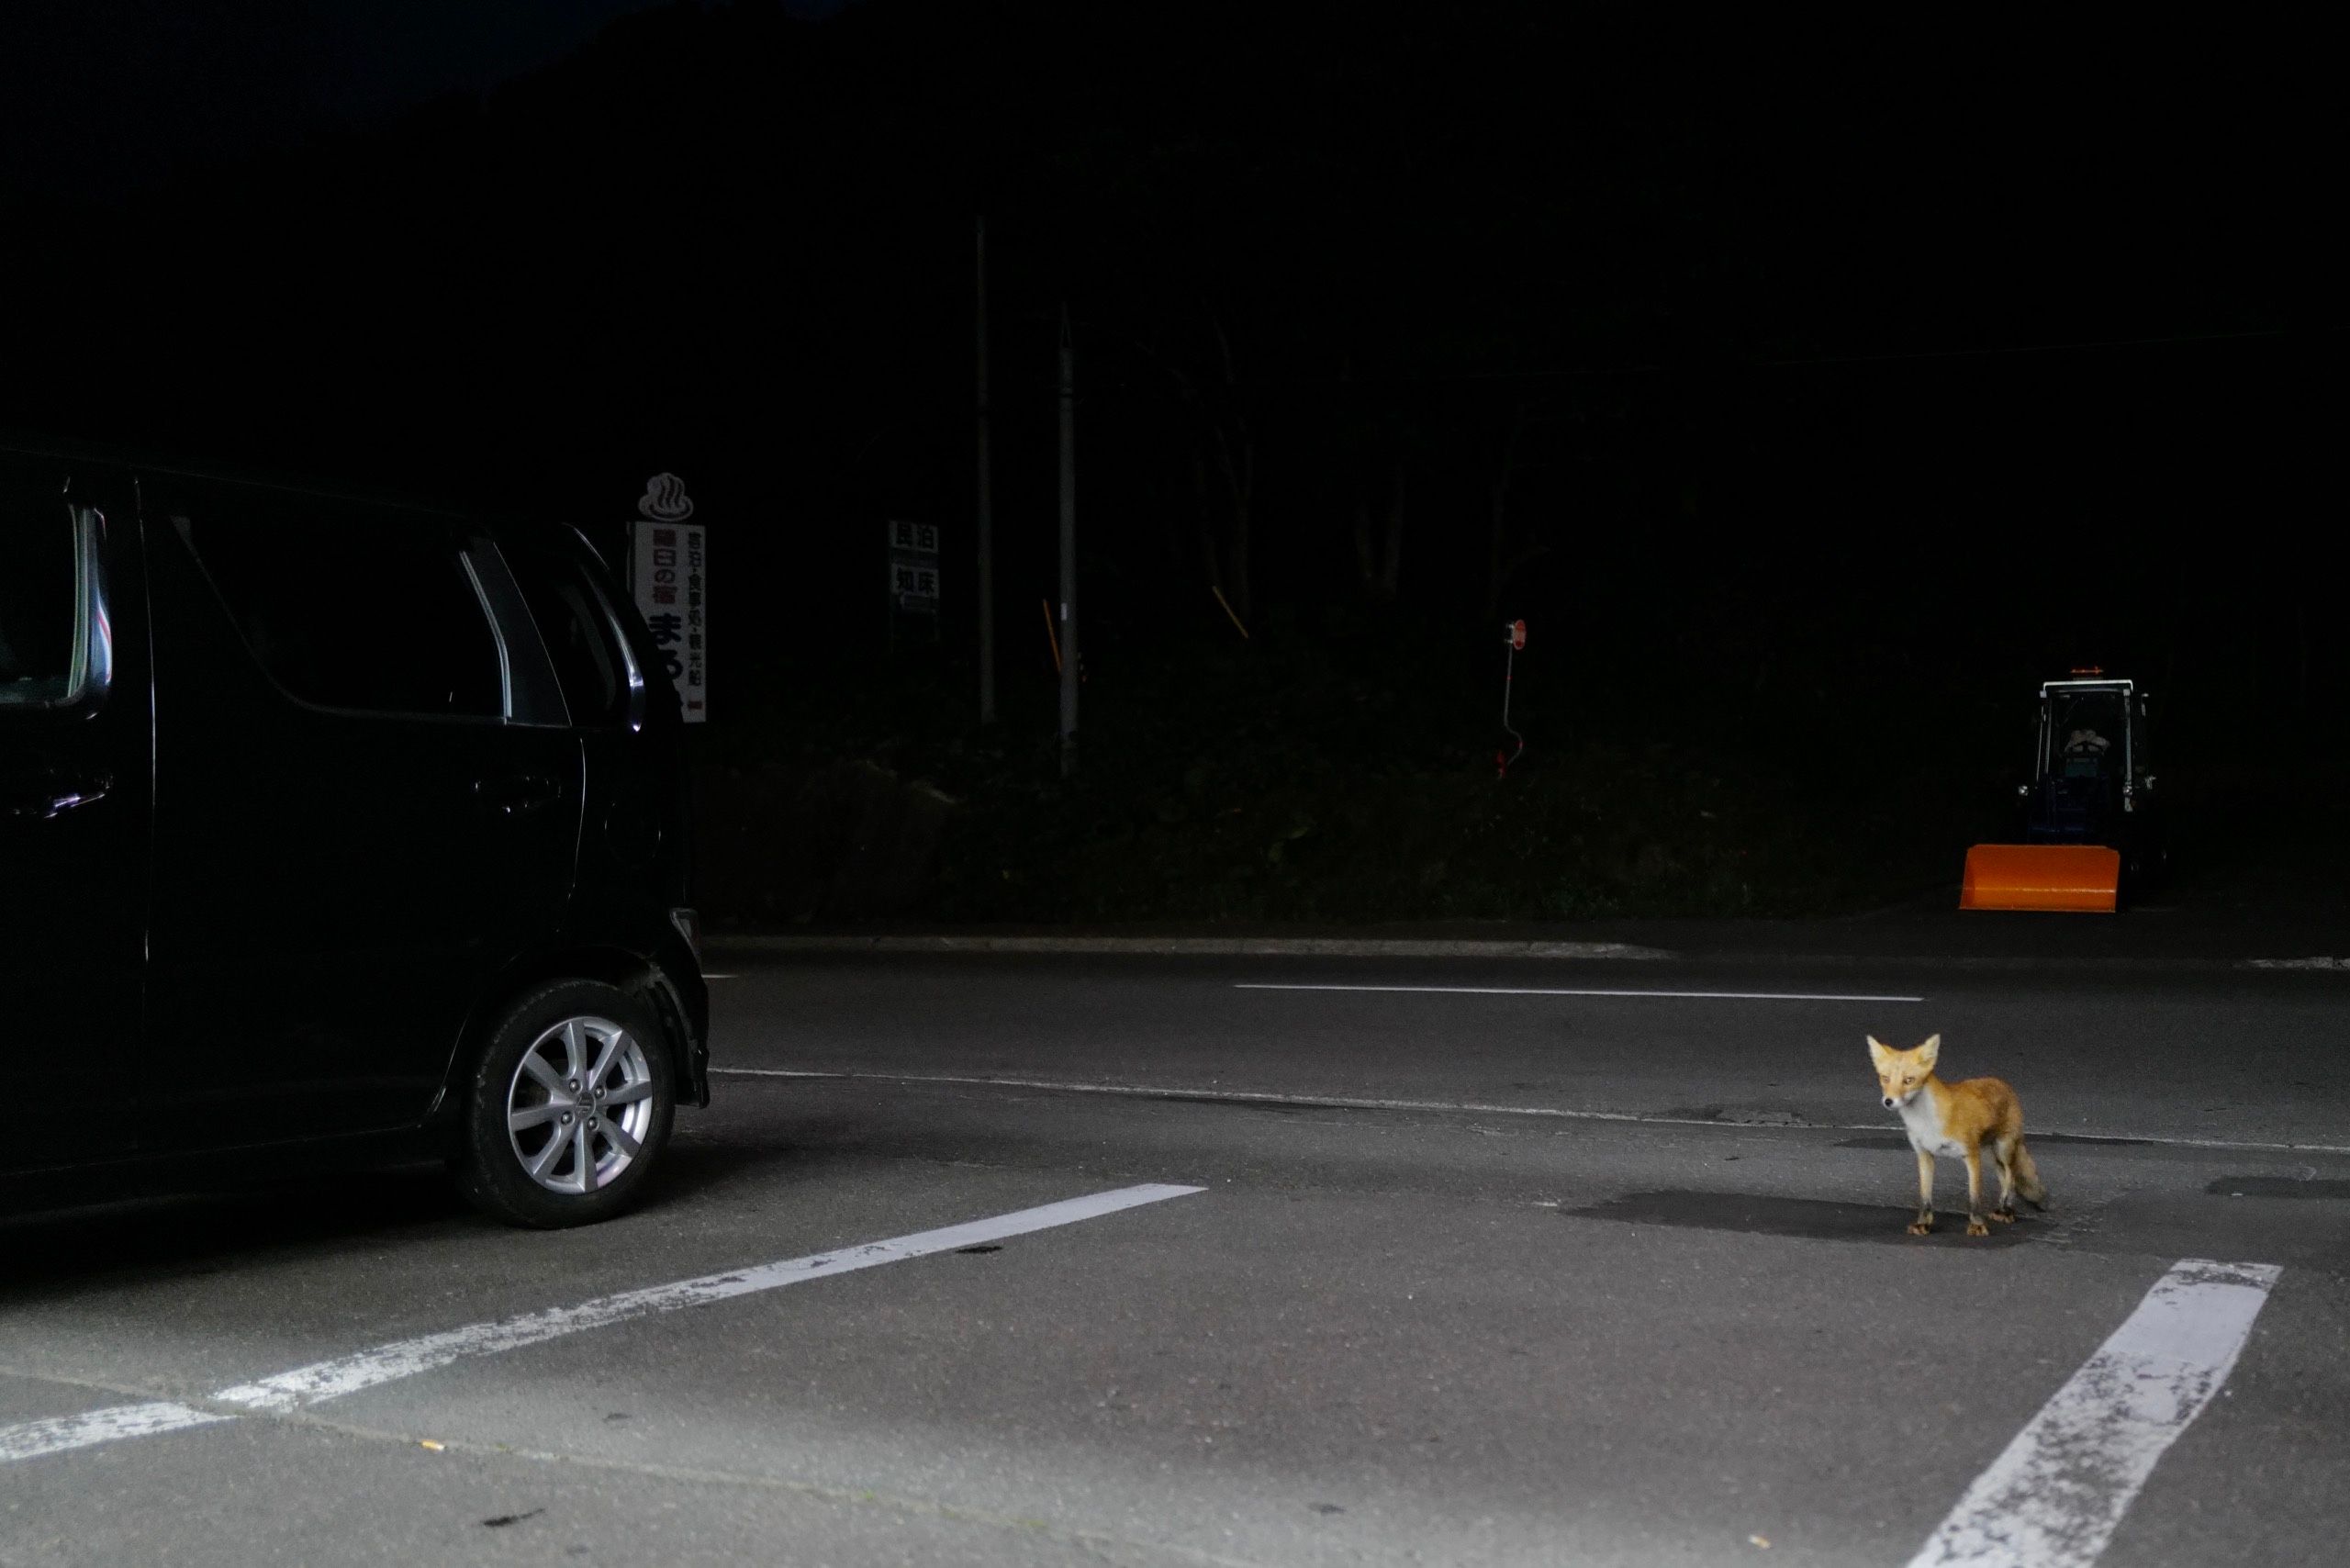 A young fox stands in a parking lot at night.